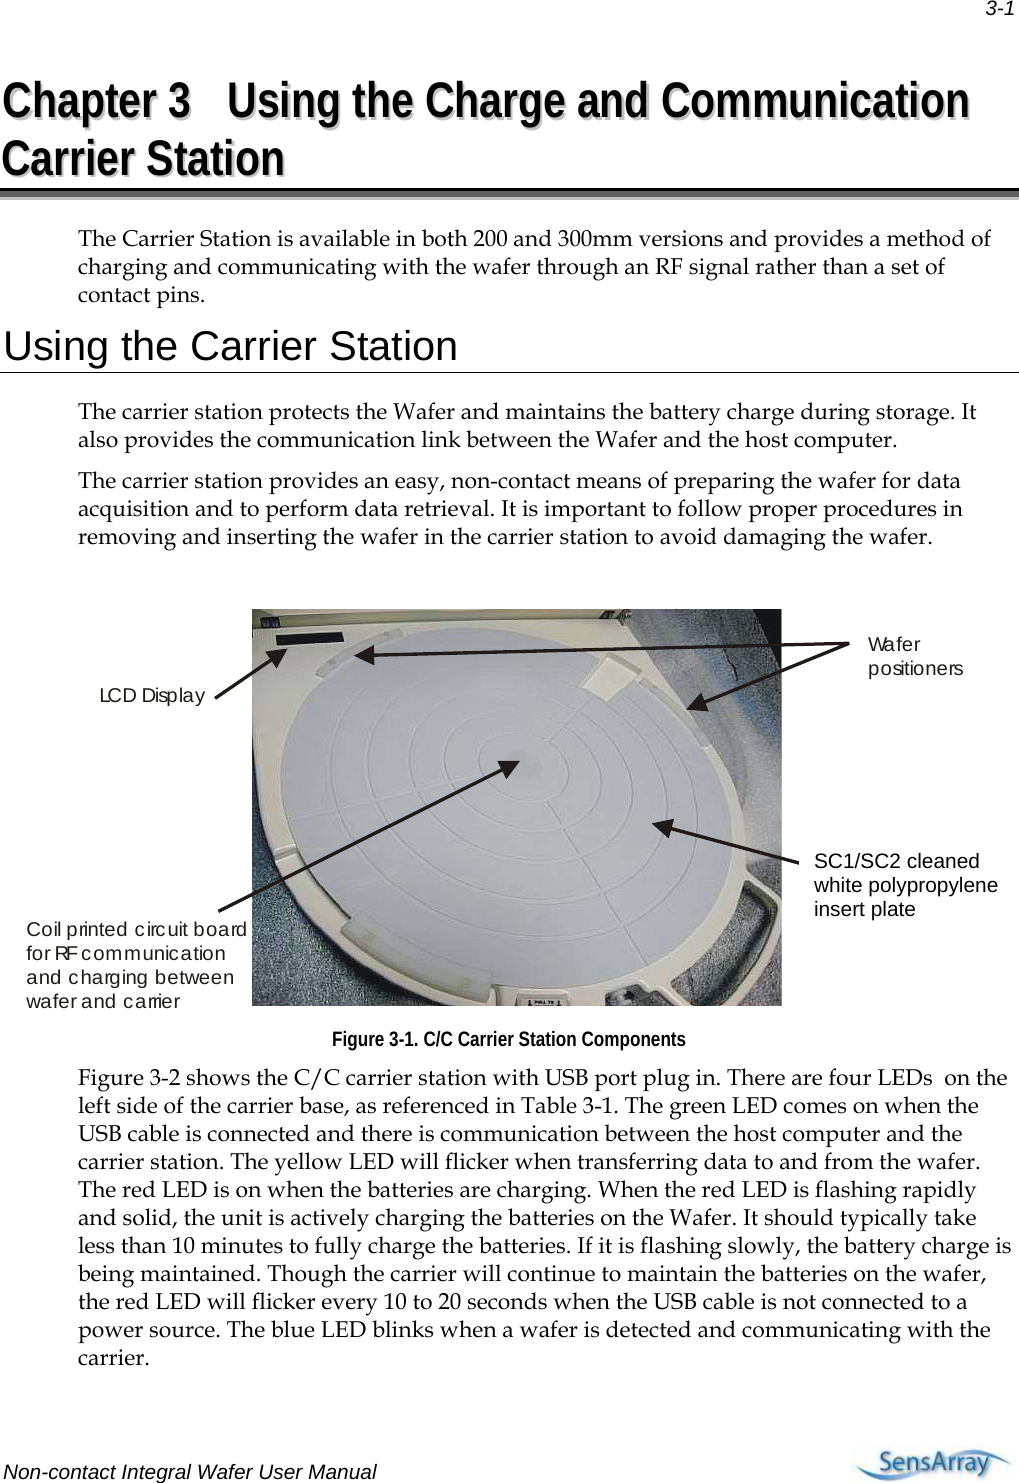  3-1 Non-contact Integral Wafer User Manual     CChhaapptteerr  33  UUssiinngg  tthhee  CChhaarrggee  aanndd  CCoommmmuunniiccaattiioonn  CCaarrrriieerr  SSttaattiioonn  The Carrier Station is available in both 200 and 300mm versions and provides a method of charging and communicating with the wafer through an RF signal rather than a set of contact pins. Using the Carrier Station The carrier station protects the Wafer and maintains the battery charge during storage. It also provides the communication link between the Wafer and the host computer.  The carrier station provides an easy, non-contact means of preparing the wafer for data acquisition and to perform data retrieval. It is important to follow proper procedures in removing and inserting the wafer in the carrier station to avoid damaging the wafer.  Cleanable white polypropylene insert plateWa f e r  positionersCoil printed circuit board for RF communication and charging between wa fer a nd c a rrierLC D Disp la y Figure 3-1. C/C Carrier Station Components Figure 3-2 shows the C/C carrier station with USB port plug in. There are four LEDs  on the left side of the carrier base, as referenced in Table 3-1. The green LED comes on when the USB cable is connected and there is communication between the host computer and the carrier station. The yellow LED will flicker when transferring data to and from the wafer. The red LED is on when the batteries are charging. When the red LED is flashing rapidly and solid, the unit is actively charging the batteries on the Wafer. It should typically take less than 10 minutes to fully charge the batteries. If it is flashing slowly, the battery charge is being maintained. Though the carrier will continue to maintain the batteries on the wafer, the red LED will flicker every 10 to 20 seconds when the USB cable is not connected to a power source. The blue LED blinks when a wafer is detected and communicating with the carrier.   SC1/SC2 cleaned white polypropylene insert plate 